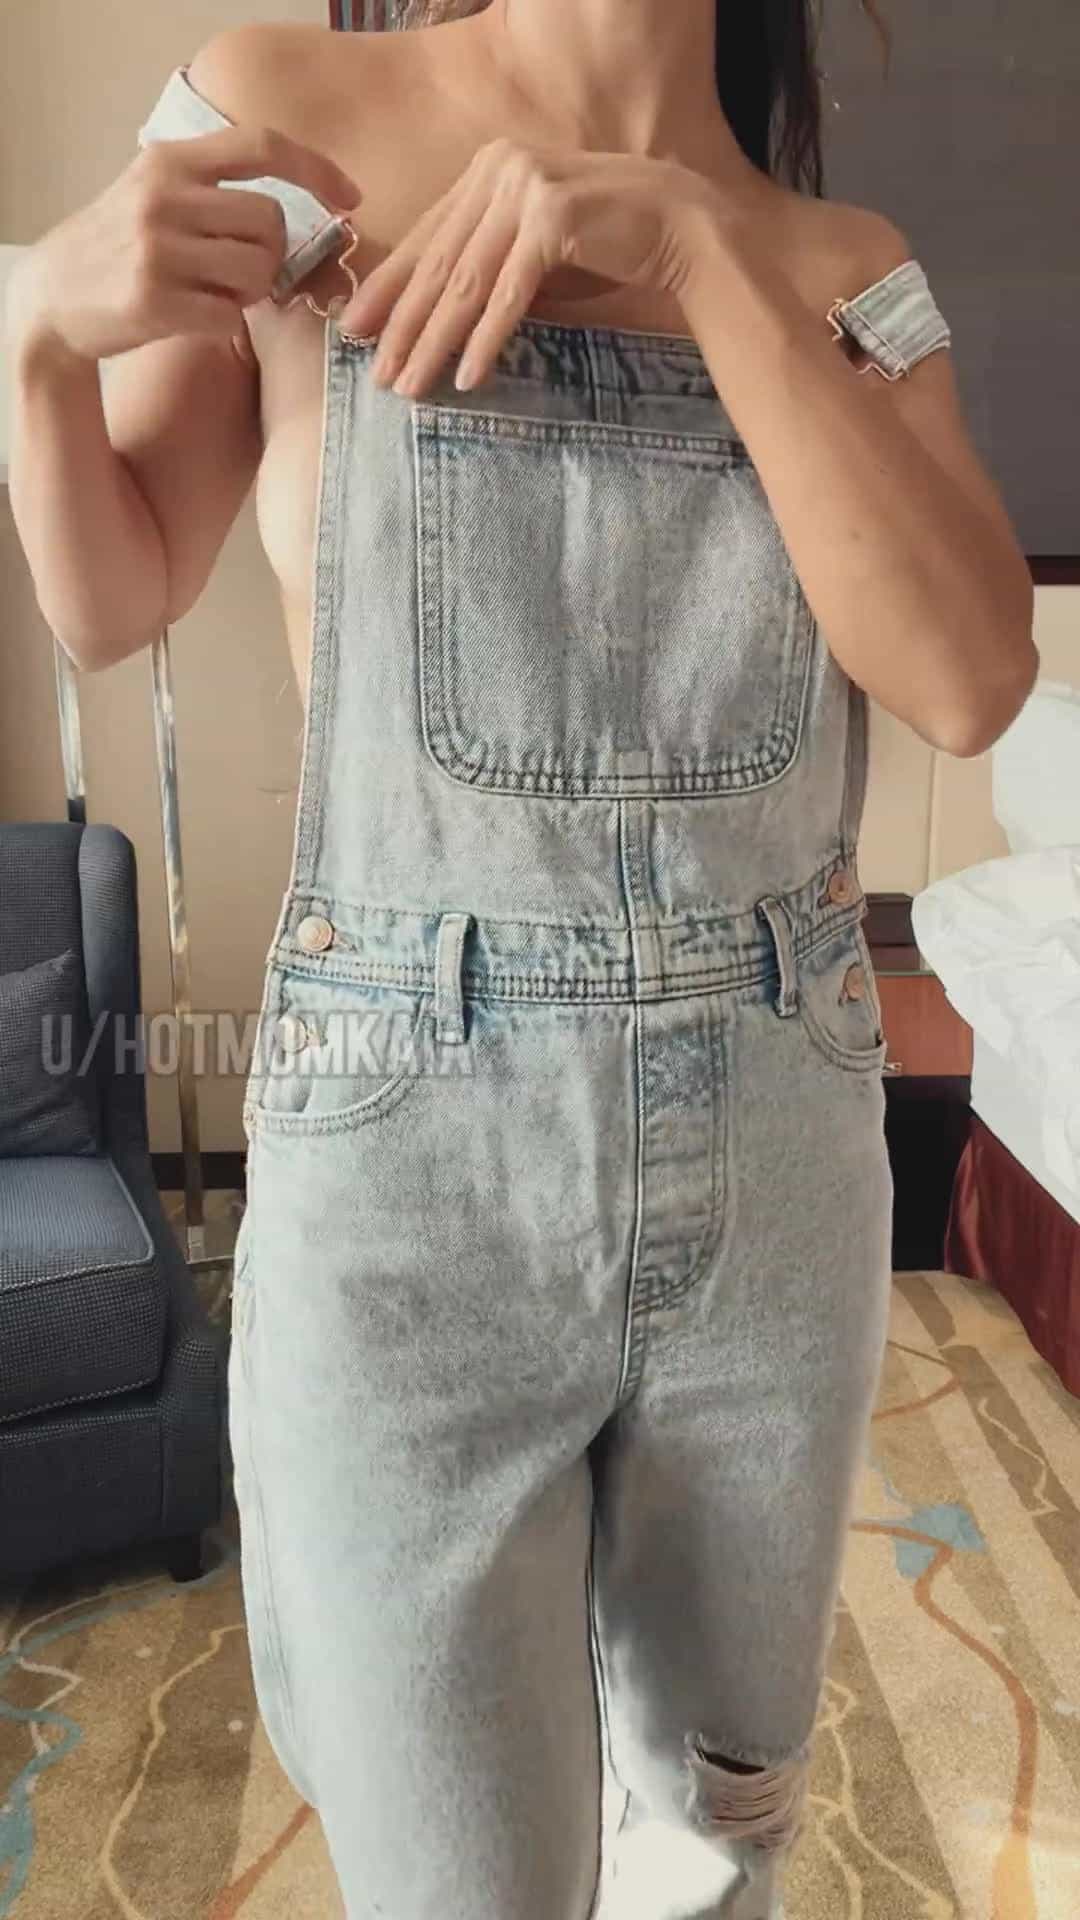 Busty Mom in overalls